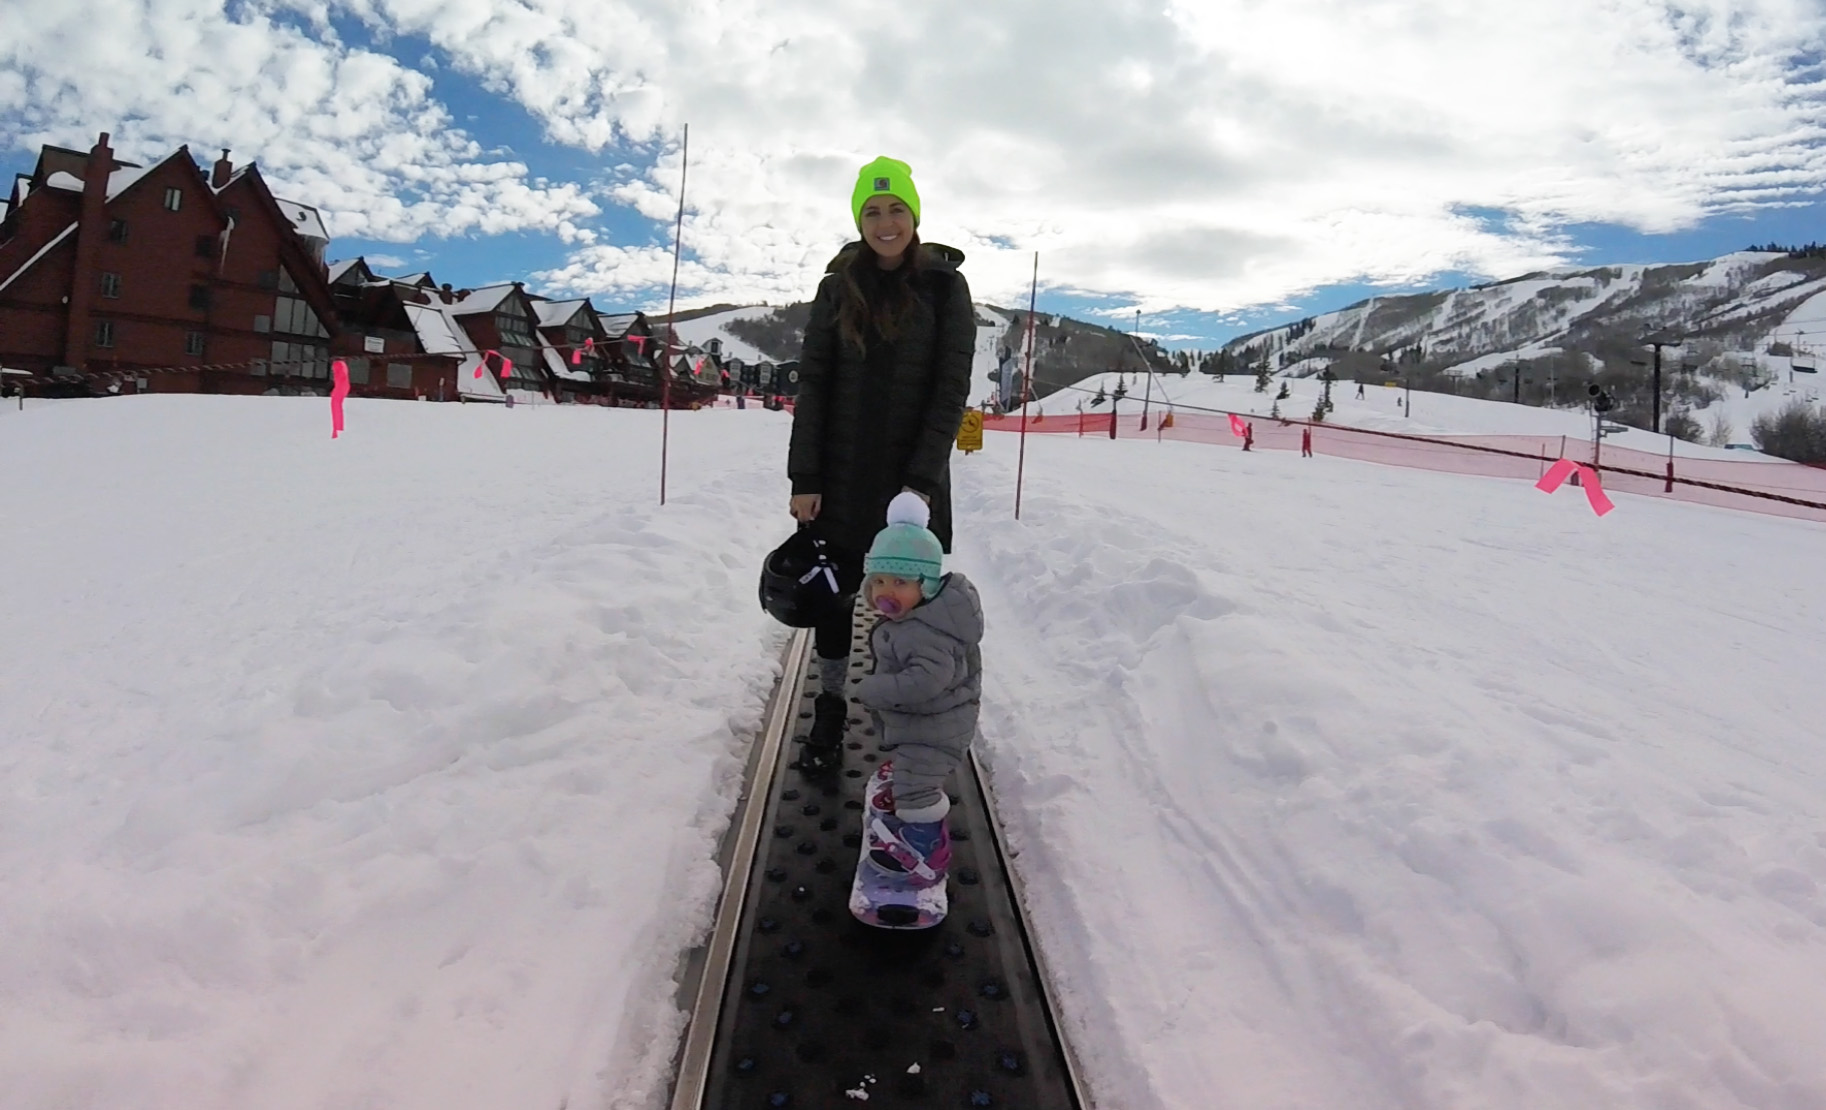 PHOTO: 14-month-old Sloan Henderson hit the slopes only a month after learning how to walk, and is already a natural on the board.